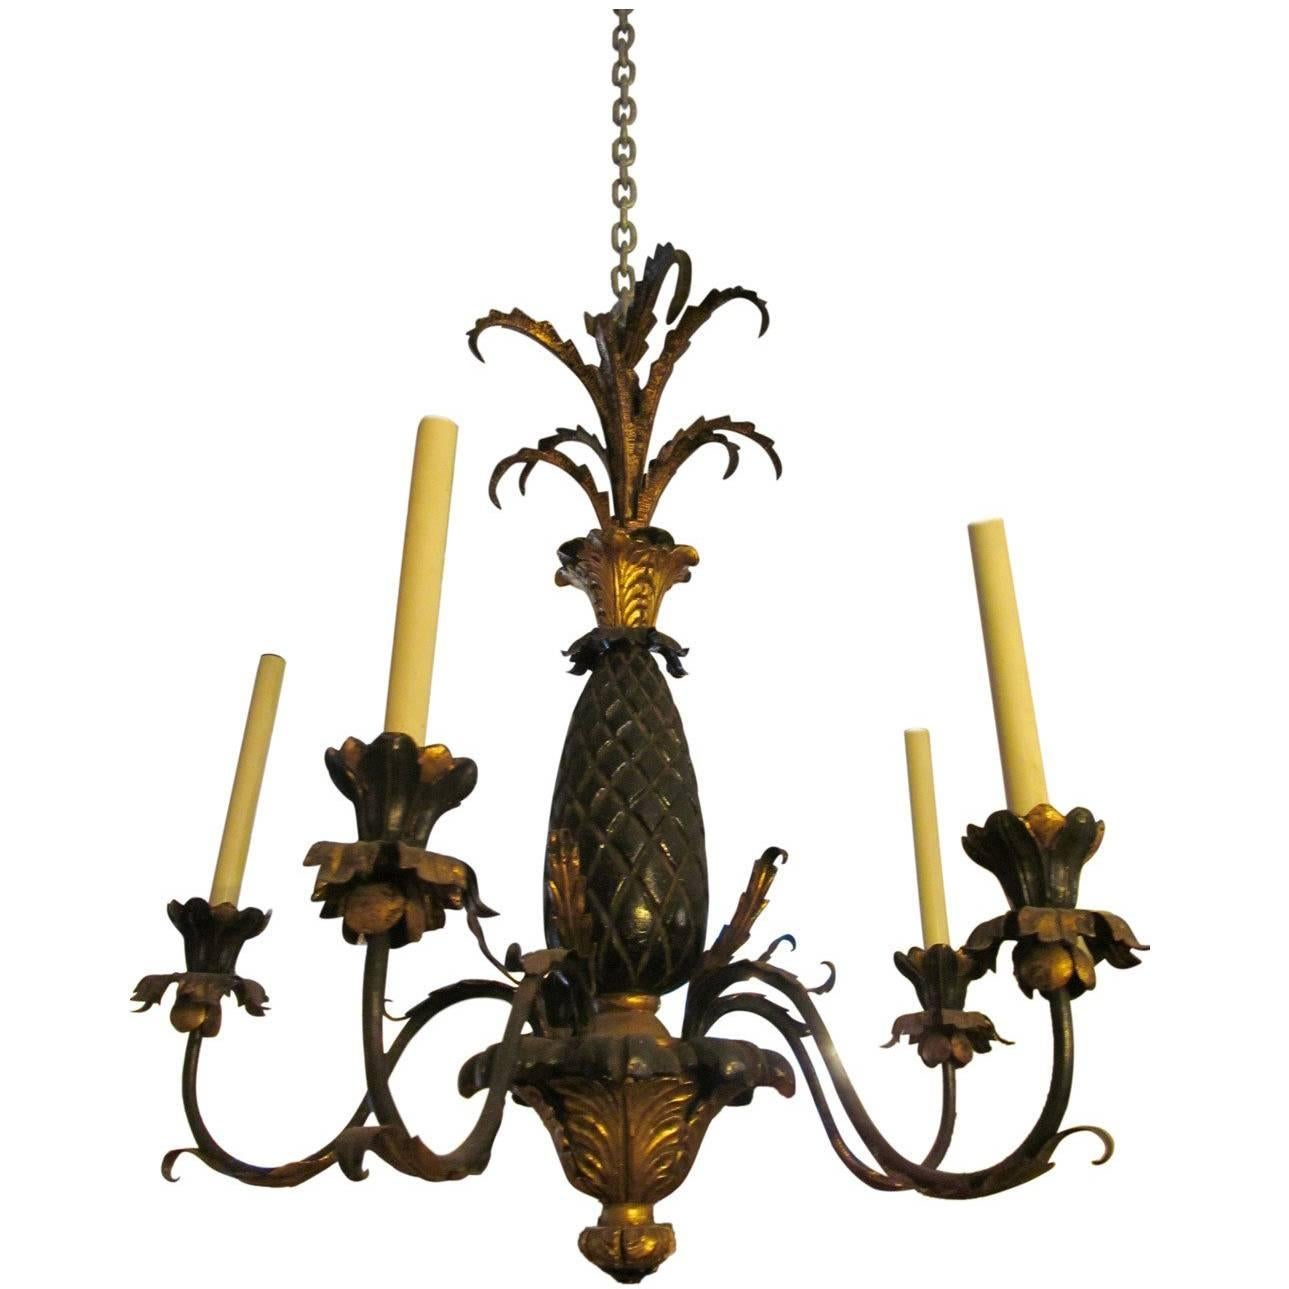 1930s Black Gold Five-Arm Chandelier Done in a French Pineapple Design